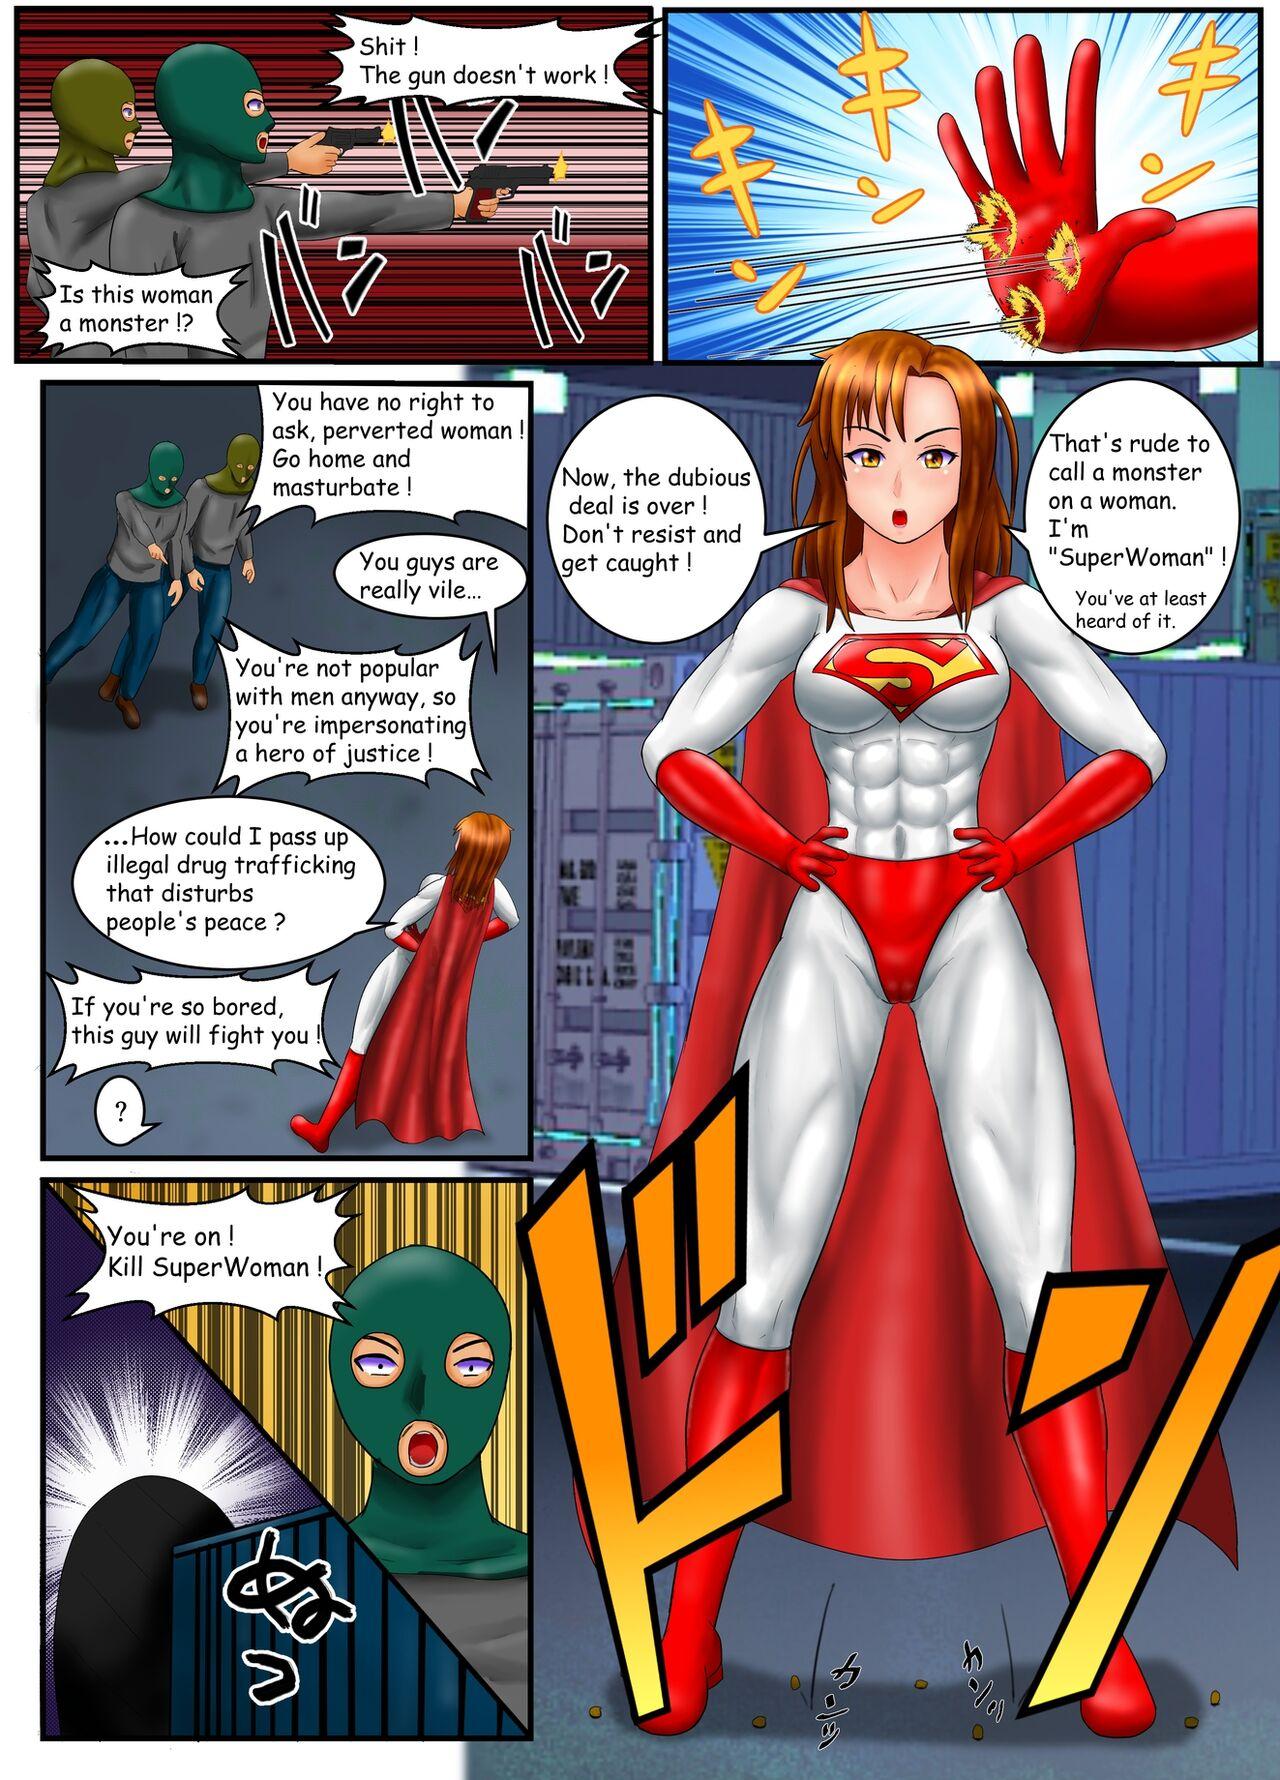 Whipping SuperWoman: The Hope Is In Her Hands - Original Amateur Porn - Page 2